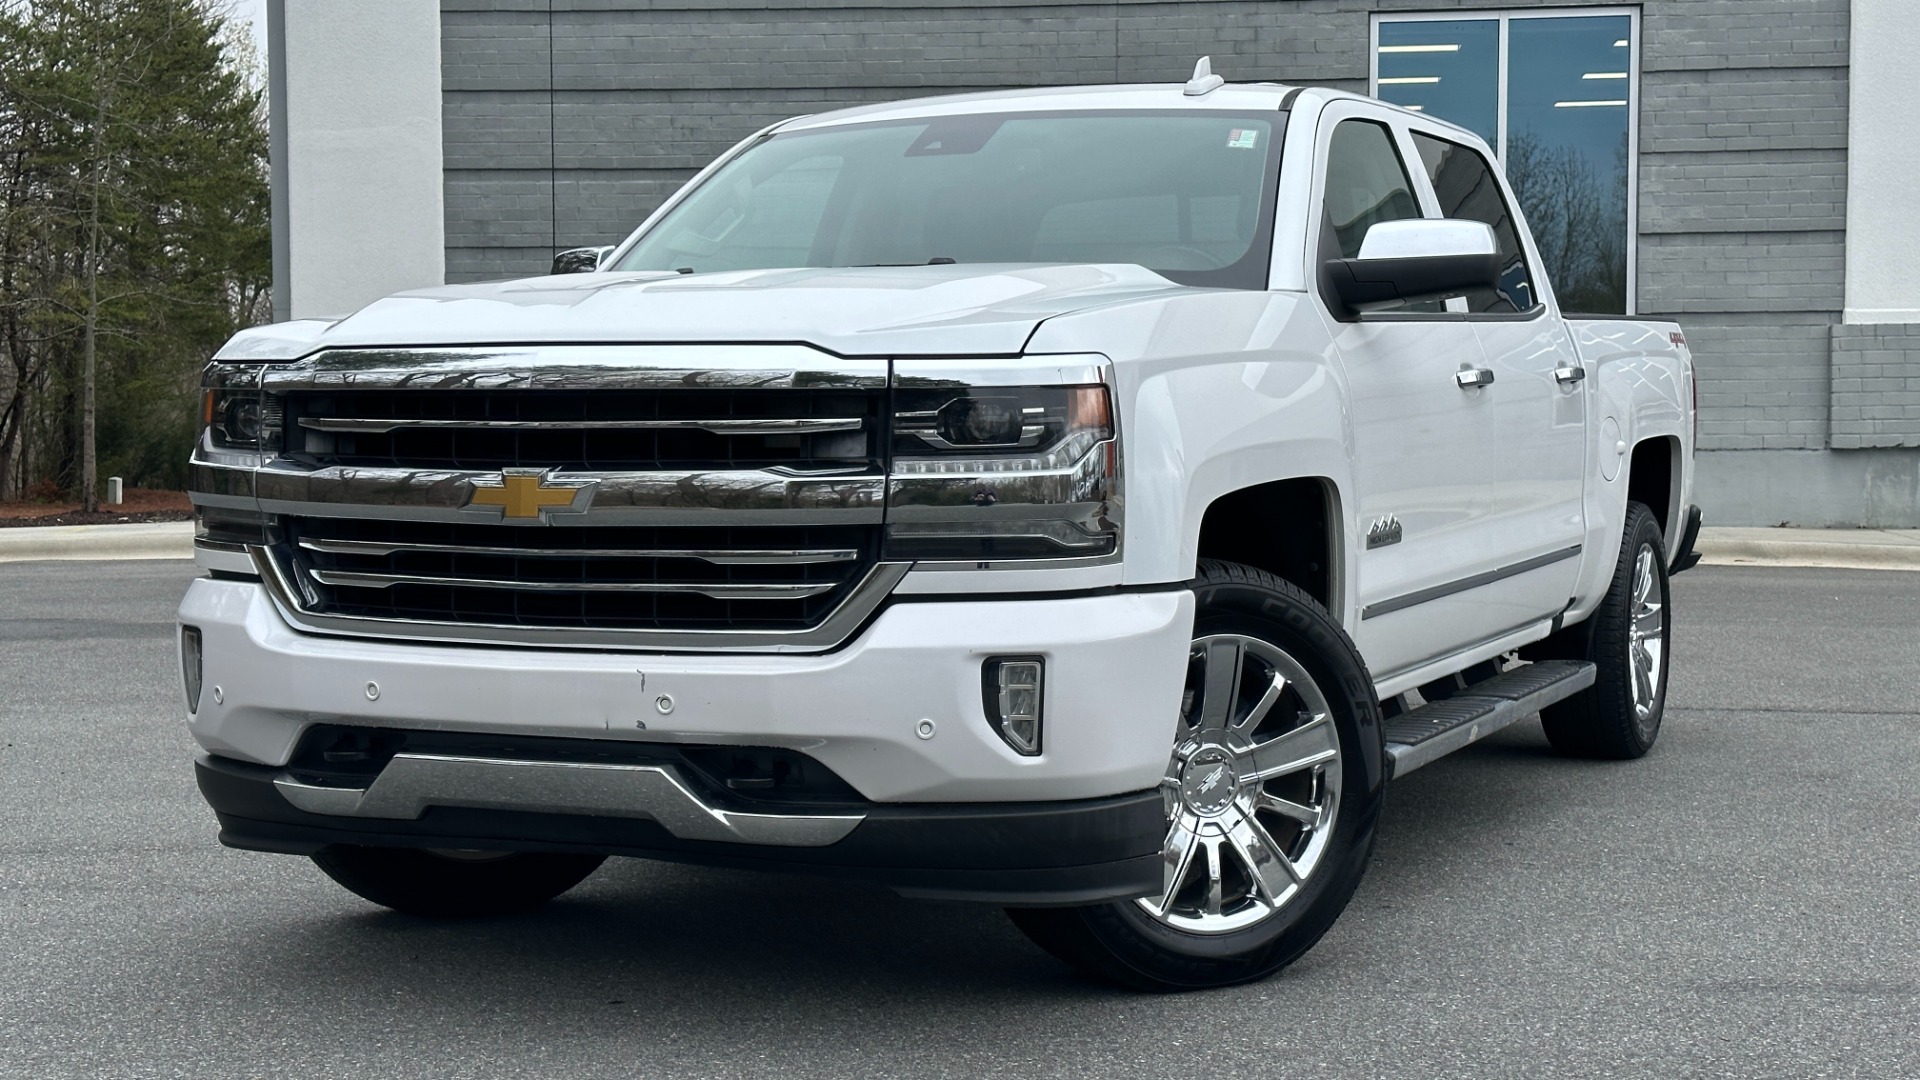 Used 2016 Chevrolet Silverado 1500 HIGH COUNTRY / PREMIUM PACKAGE / PEARL PAINT / SUNROOF / 4X4 for sale Sold at Formula Imports in Charlotte NC 28227 44